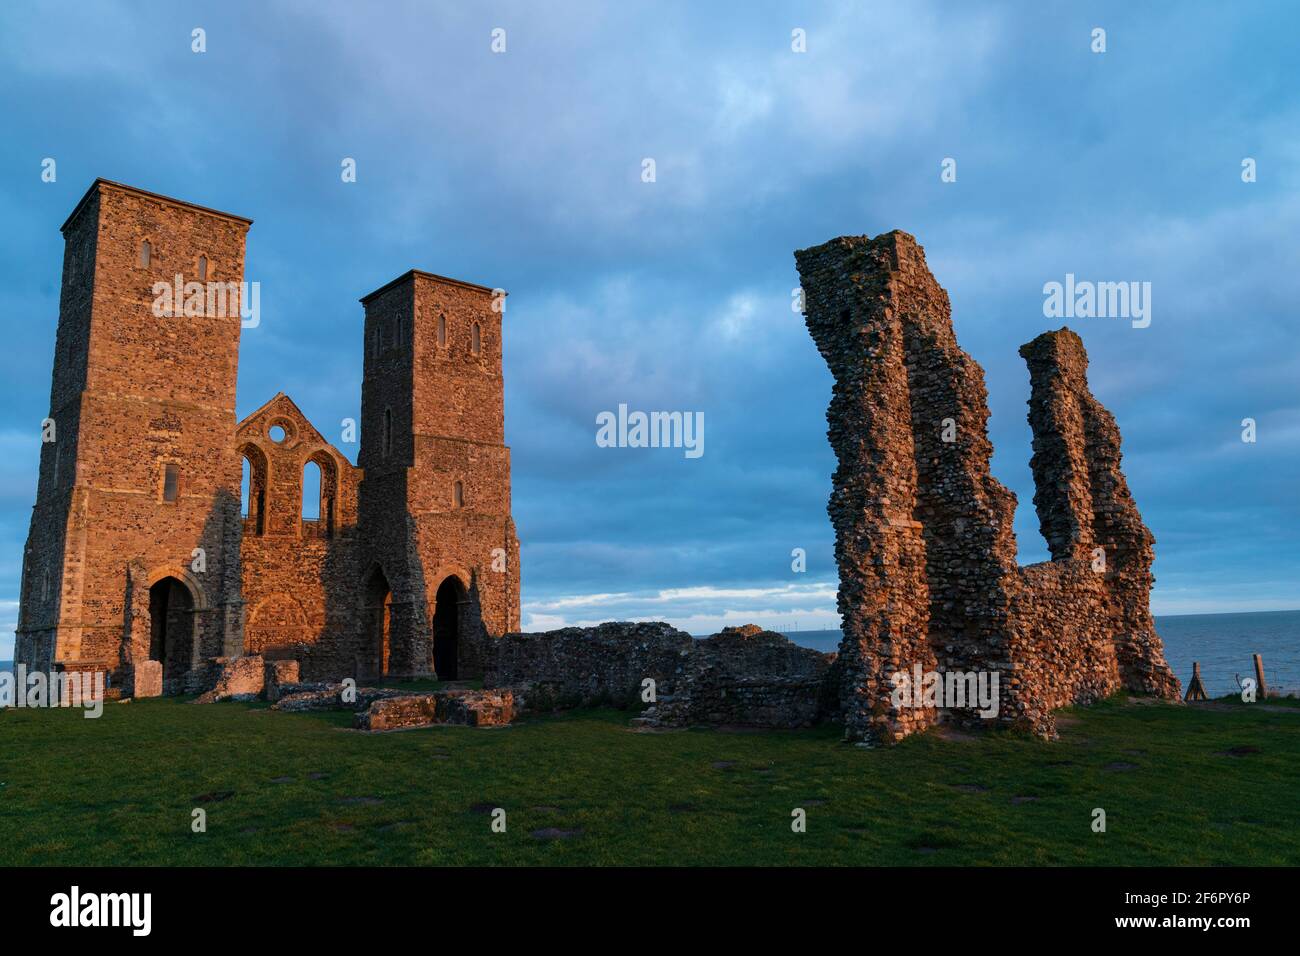 The 12th century twin towers, well known landmark on the Kent Coast, part of the ruined Angelo Saxon church at Reculver. Golden hour, early morning. Stock Photo